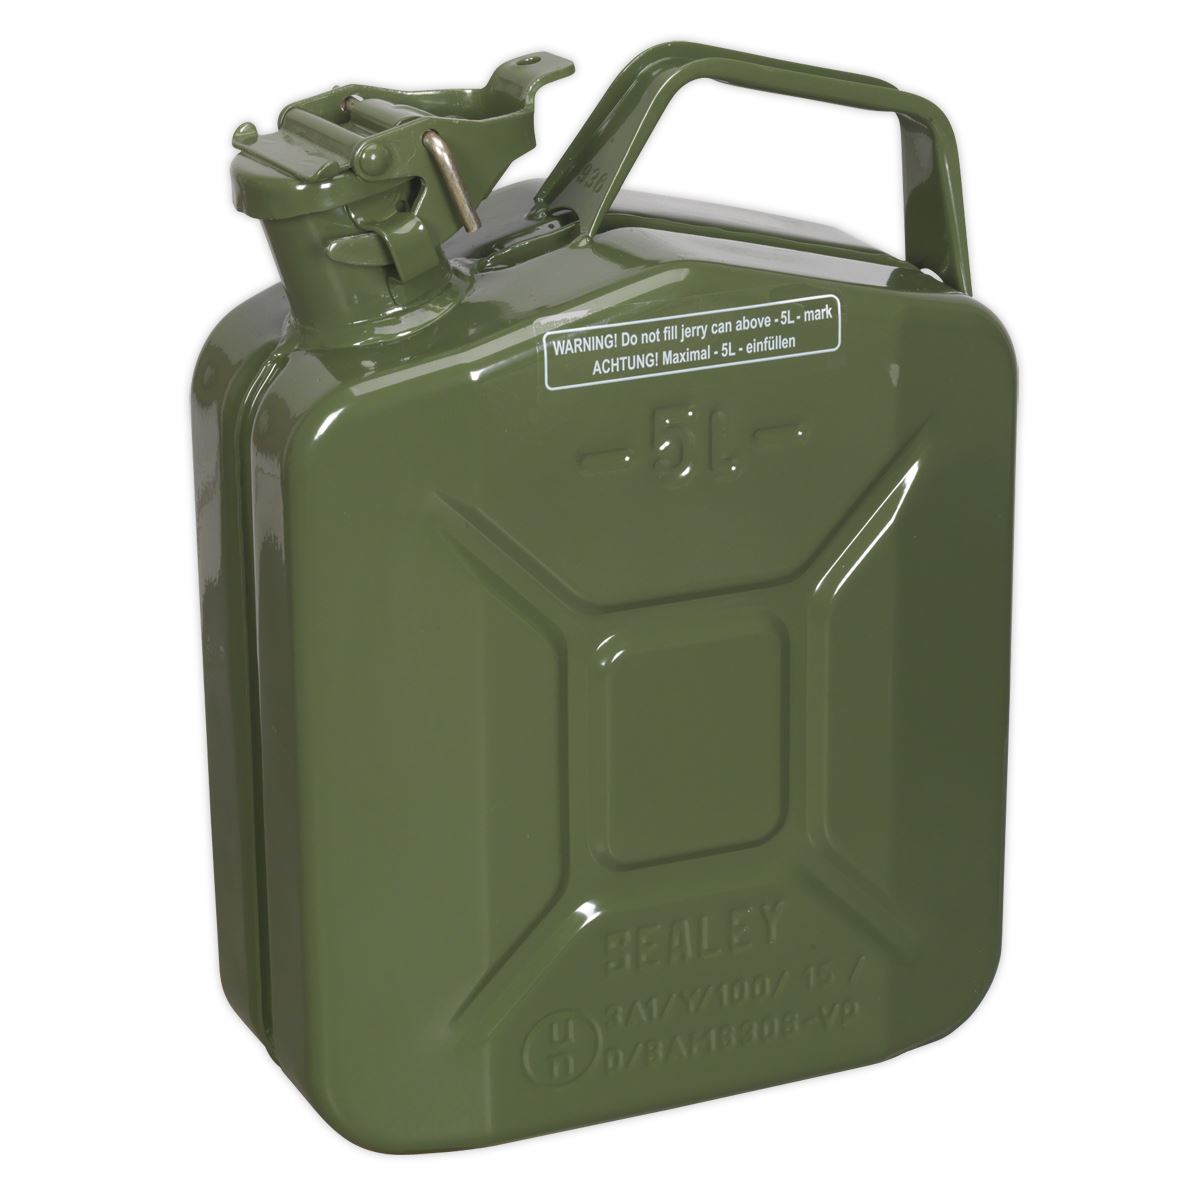 Sealey Jerry Can 5L - Green